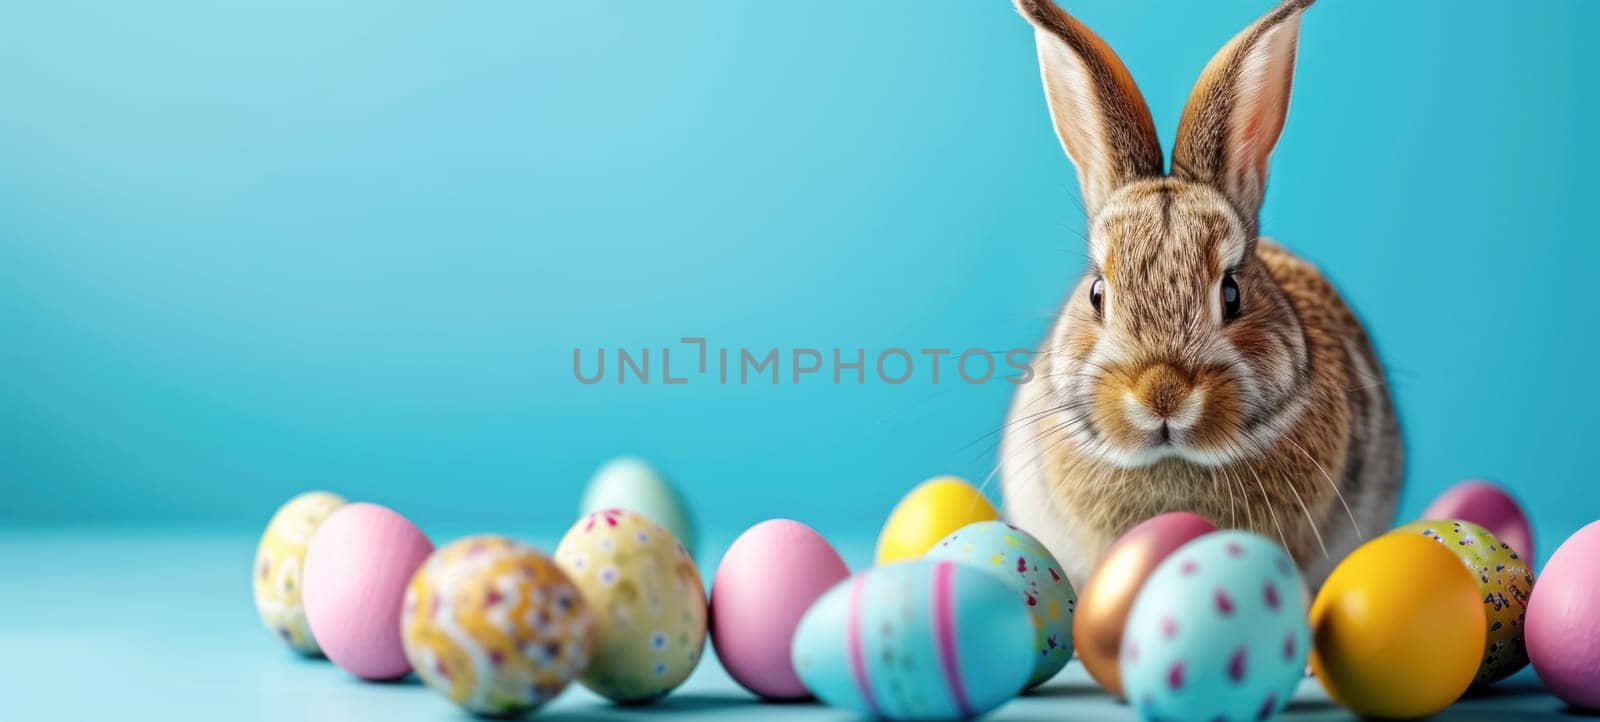 Easter banner with colorful painted eggs and a little bunny rabbit on a blue background with copy space. Happy Easter greeting card.